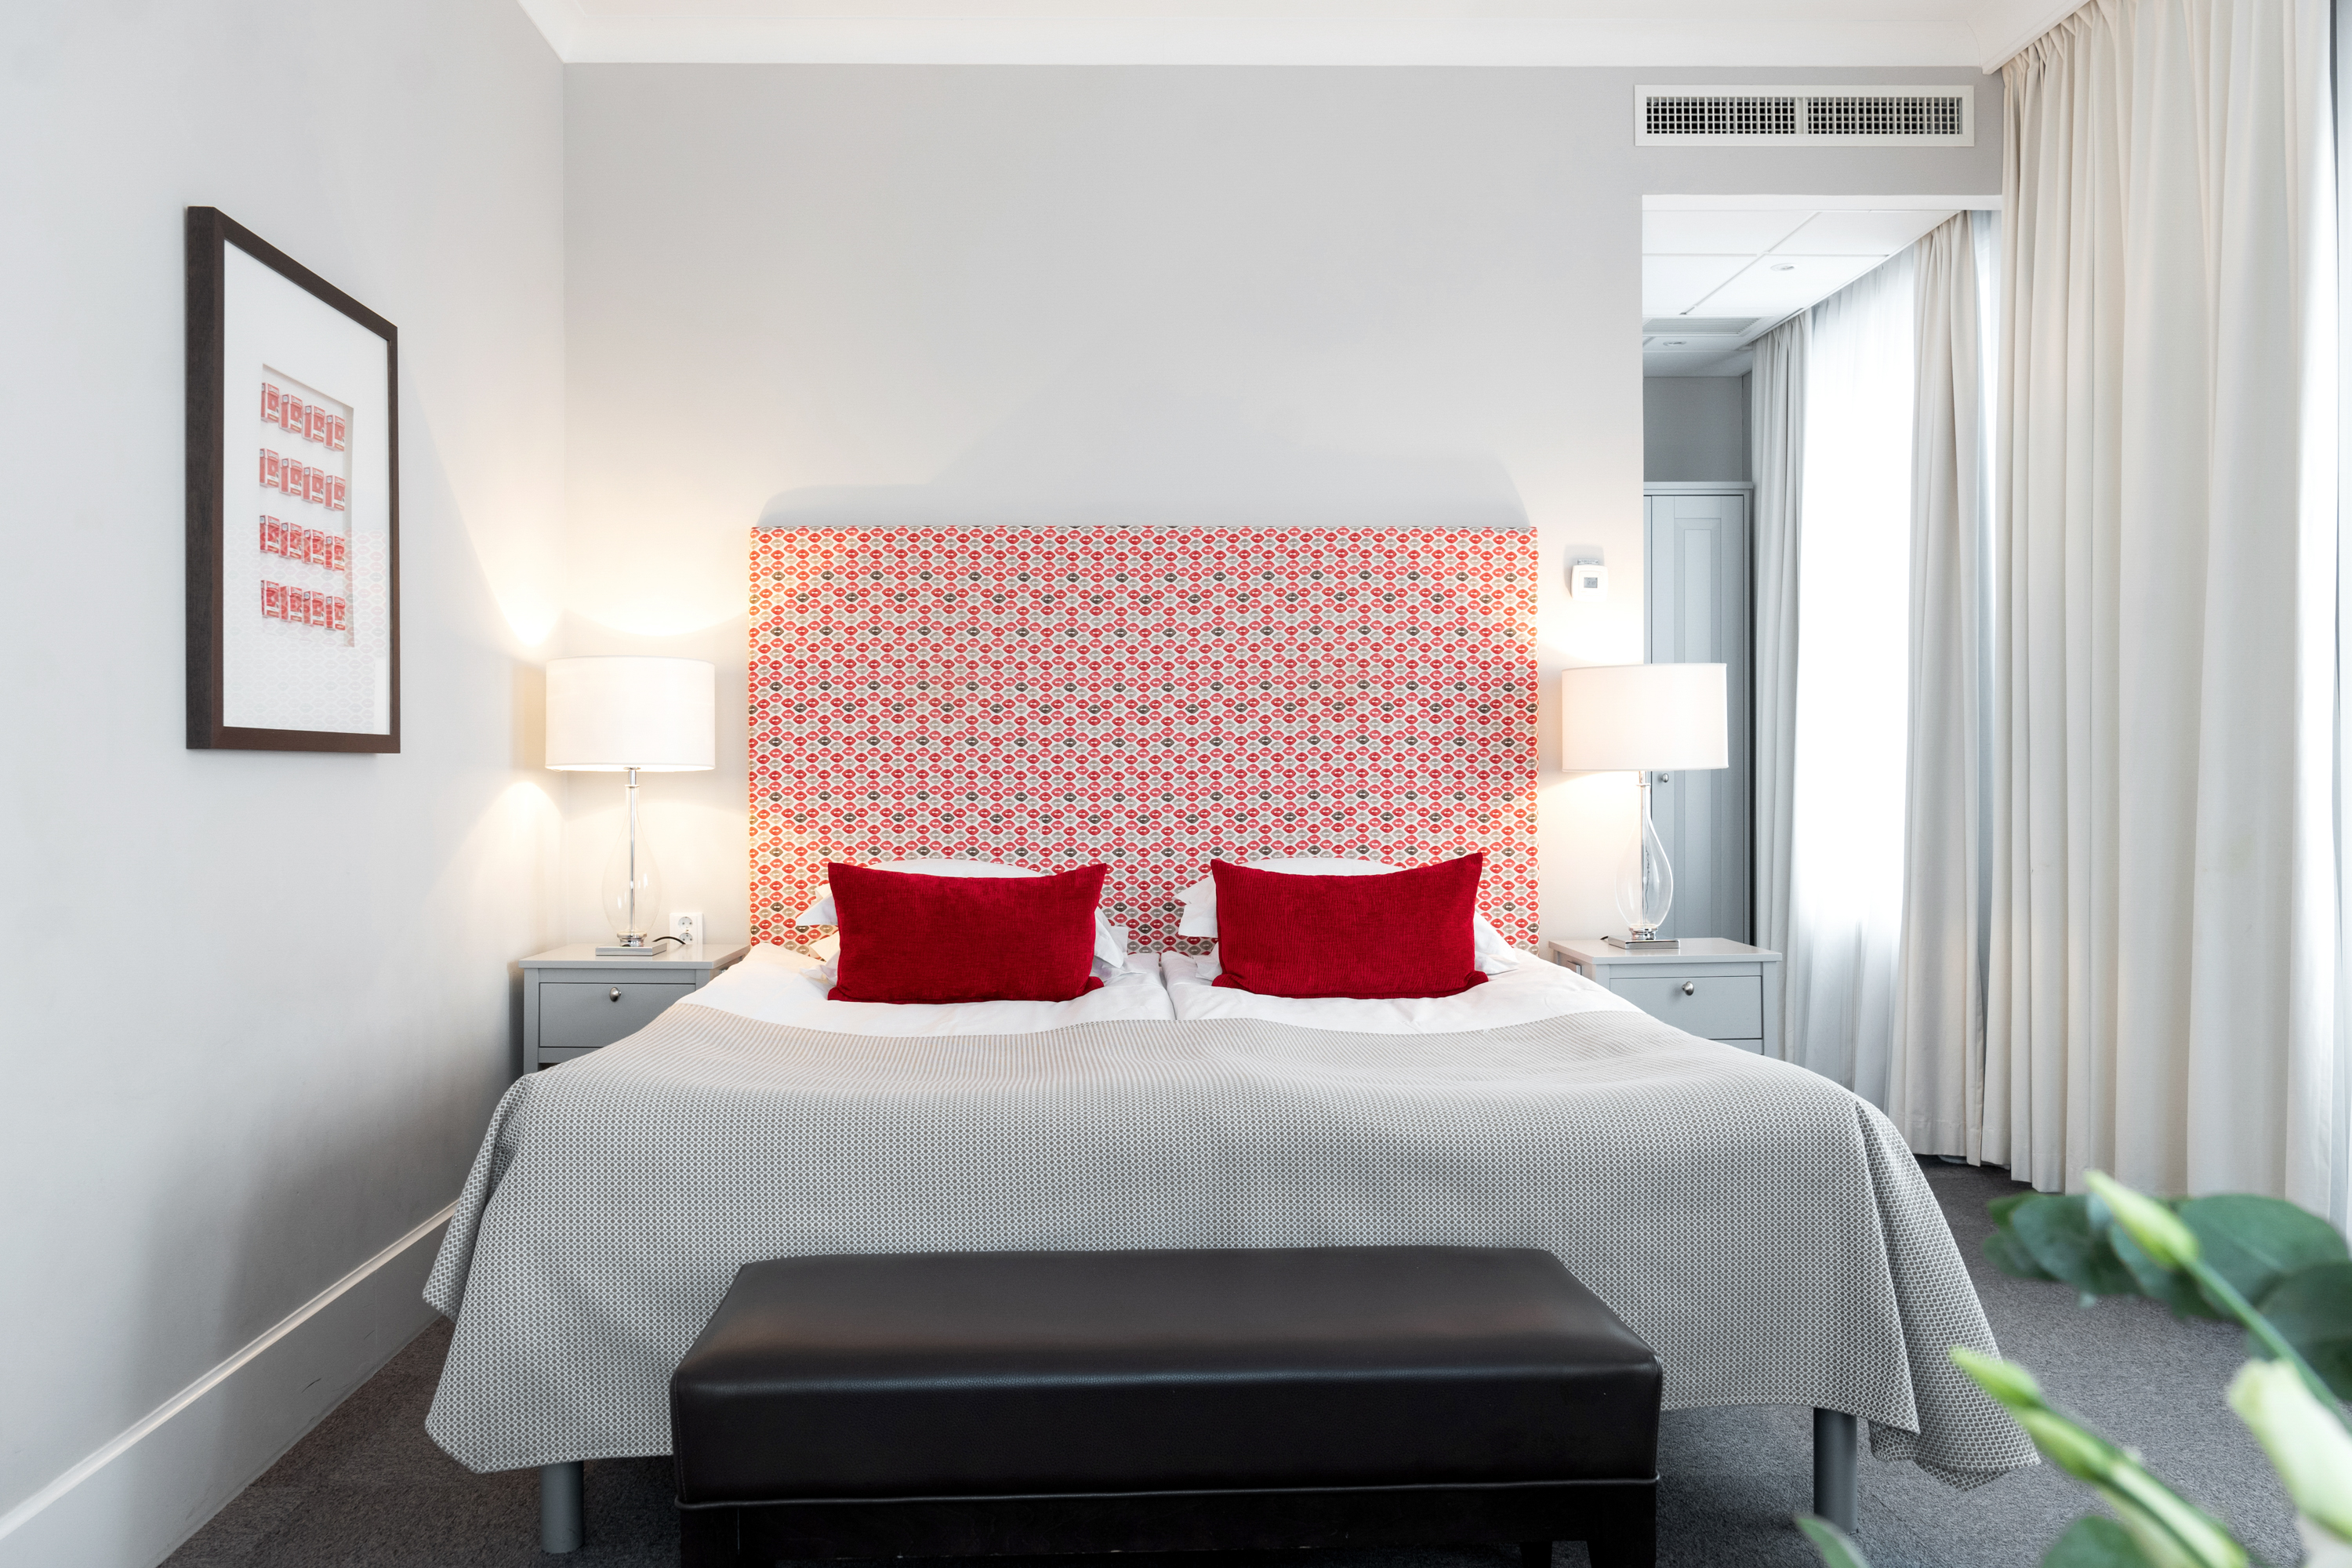 Bright suite with double bed, red pillows and bedside lamps